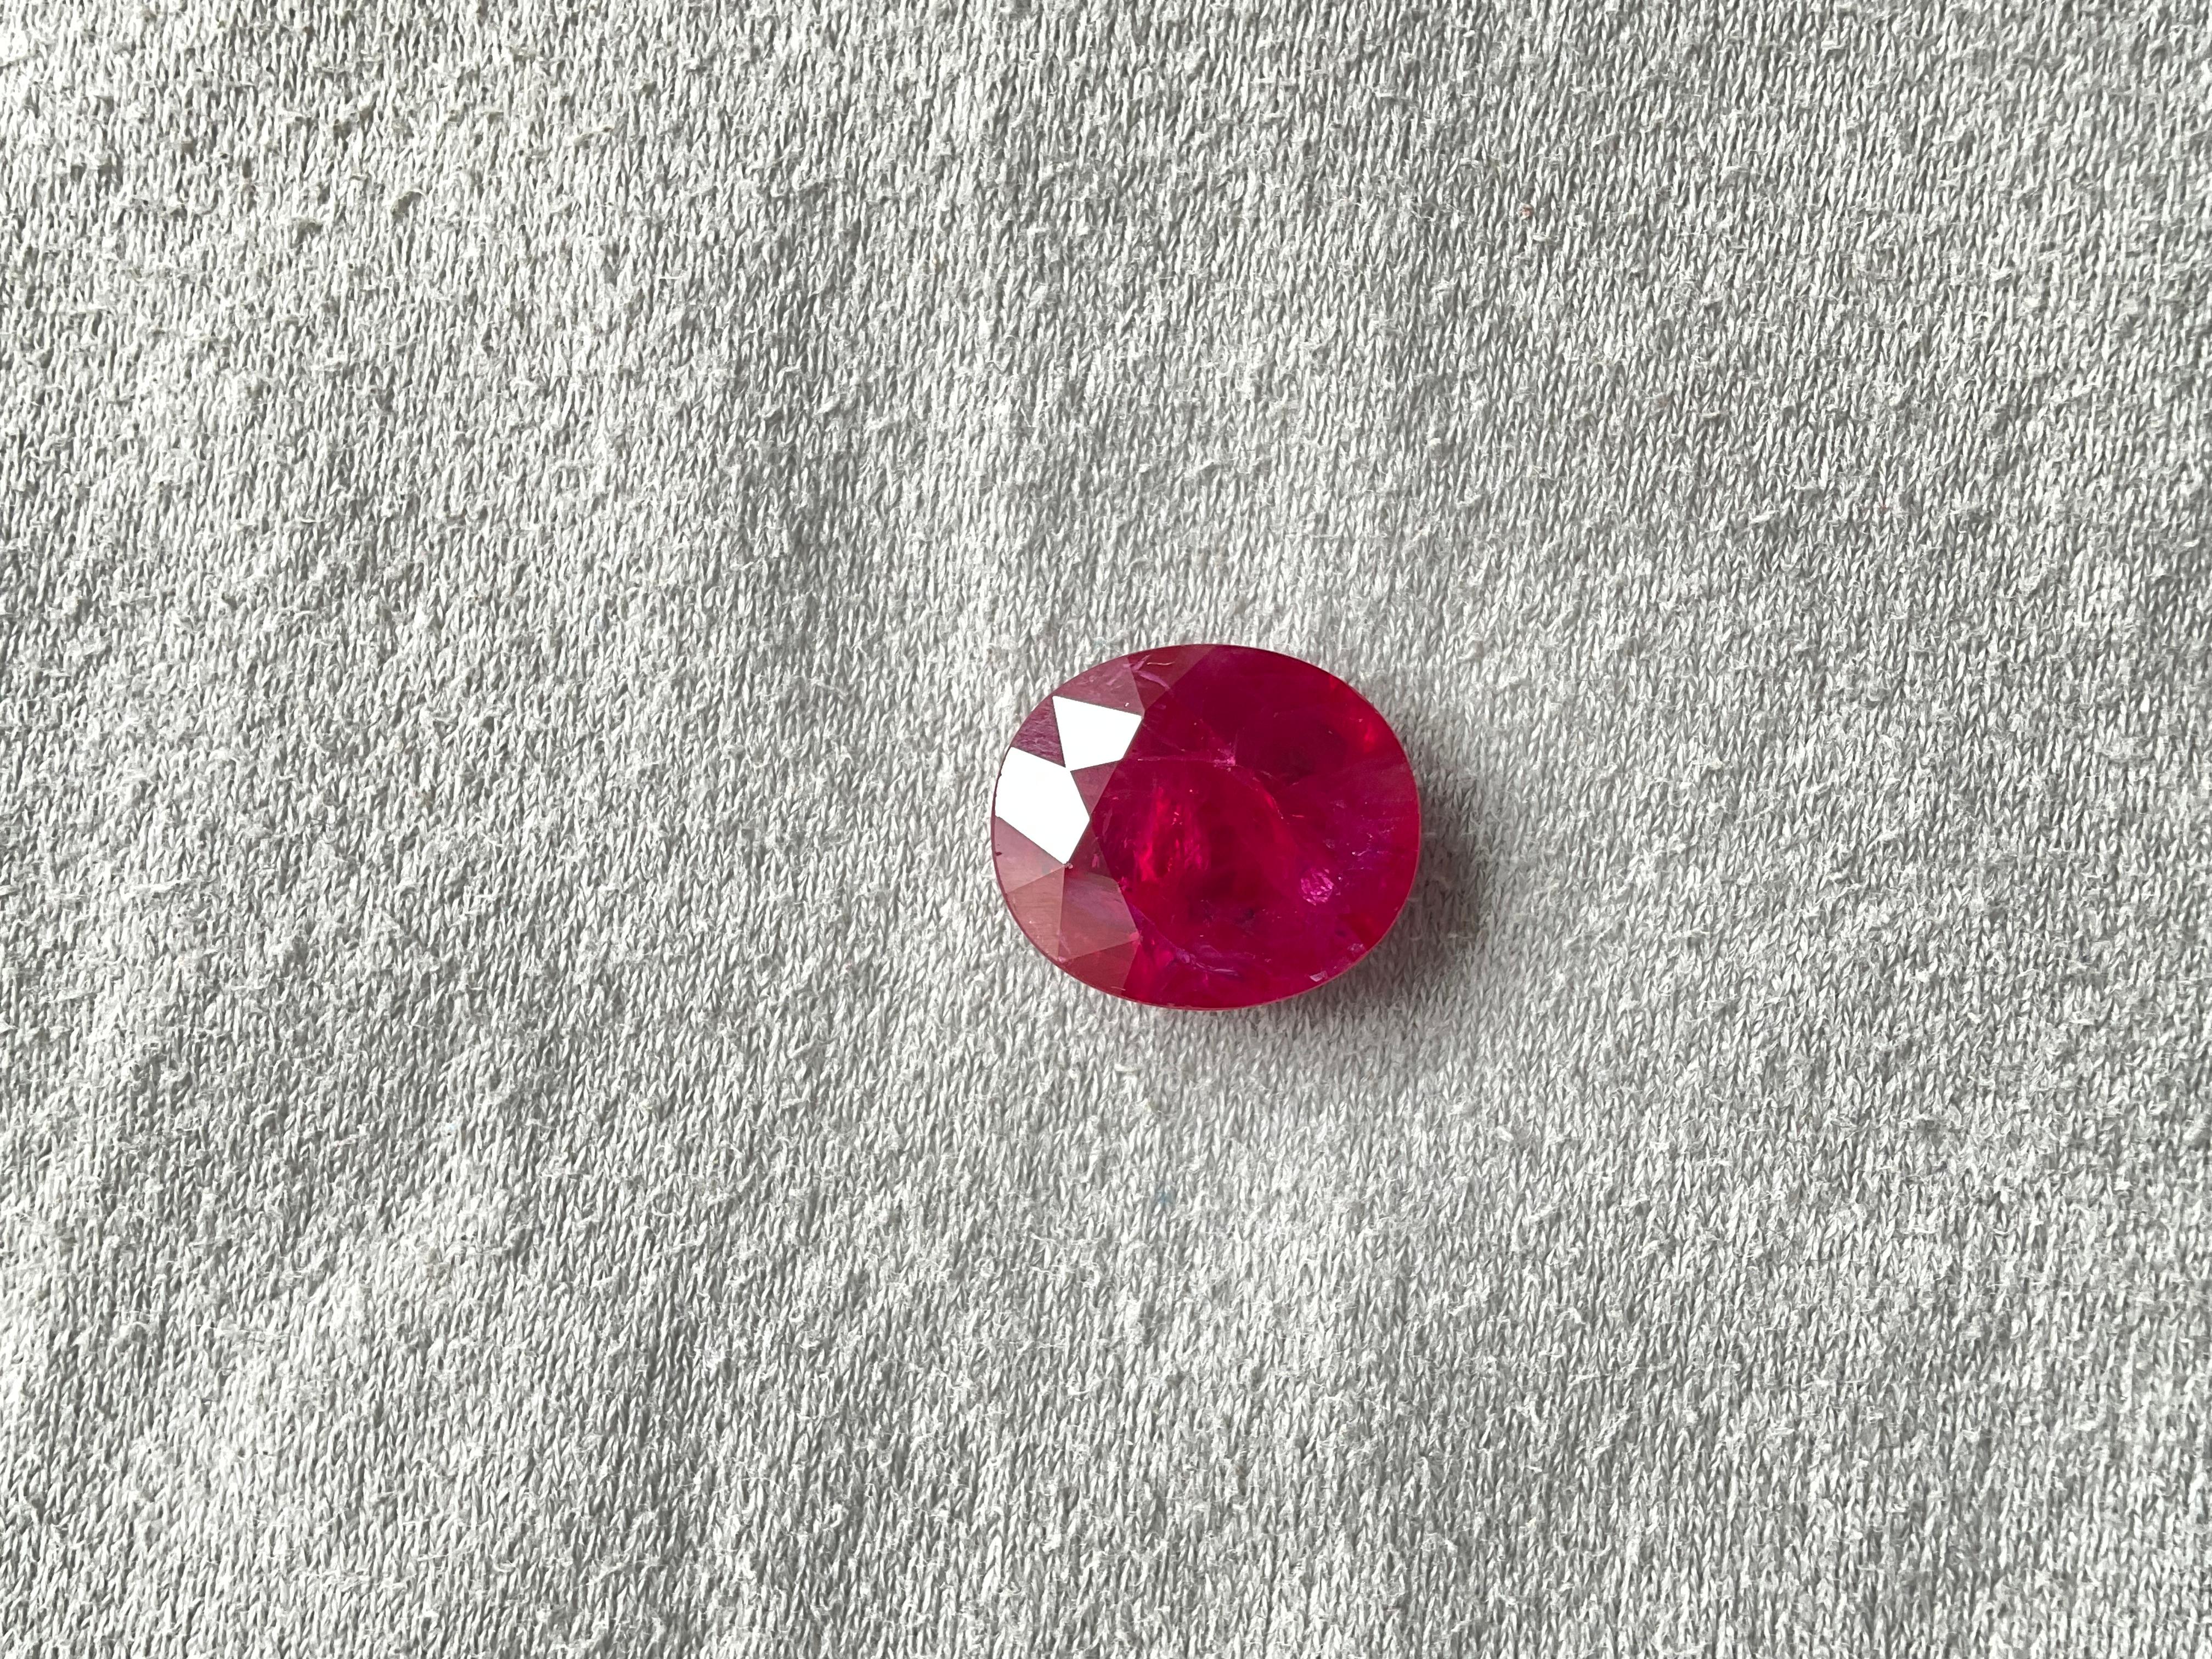 Oval Cut 12.86 Carats Ruby Mozambique Oval Faceted Heated Cut Stone Top Quality Gemstone For Sale